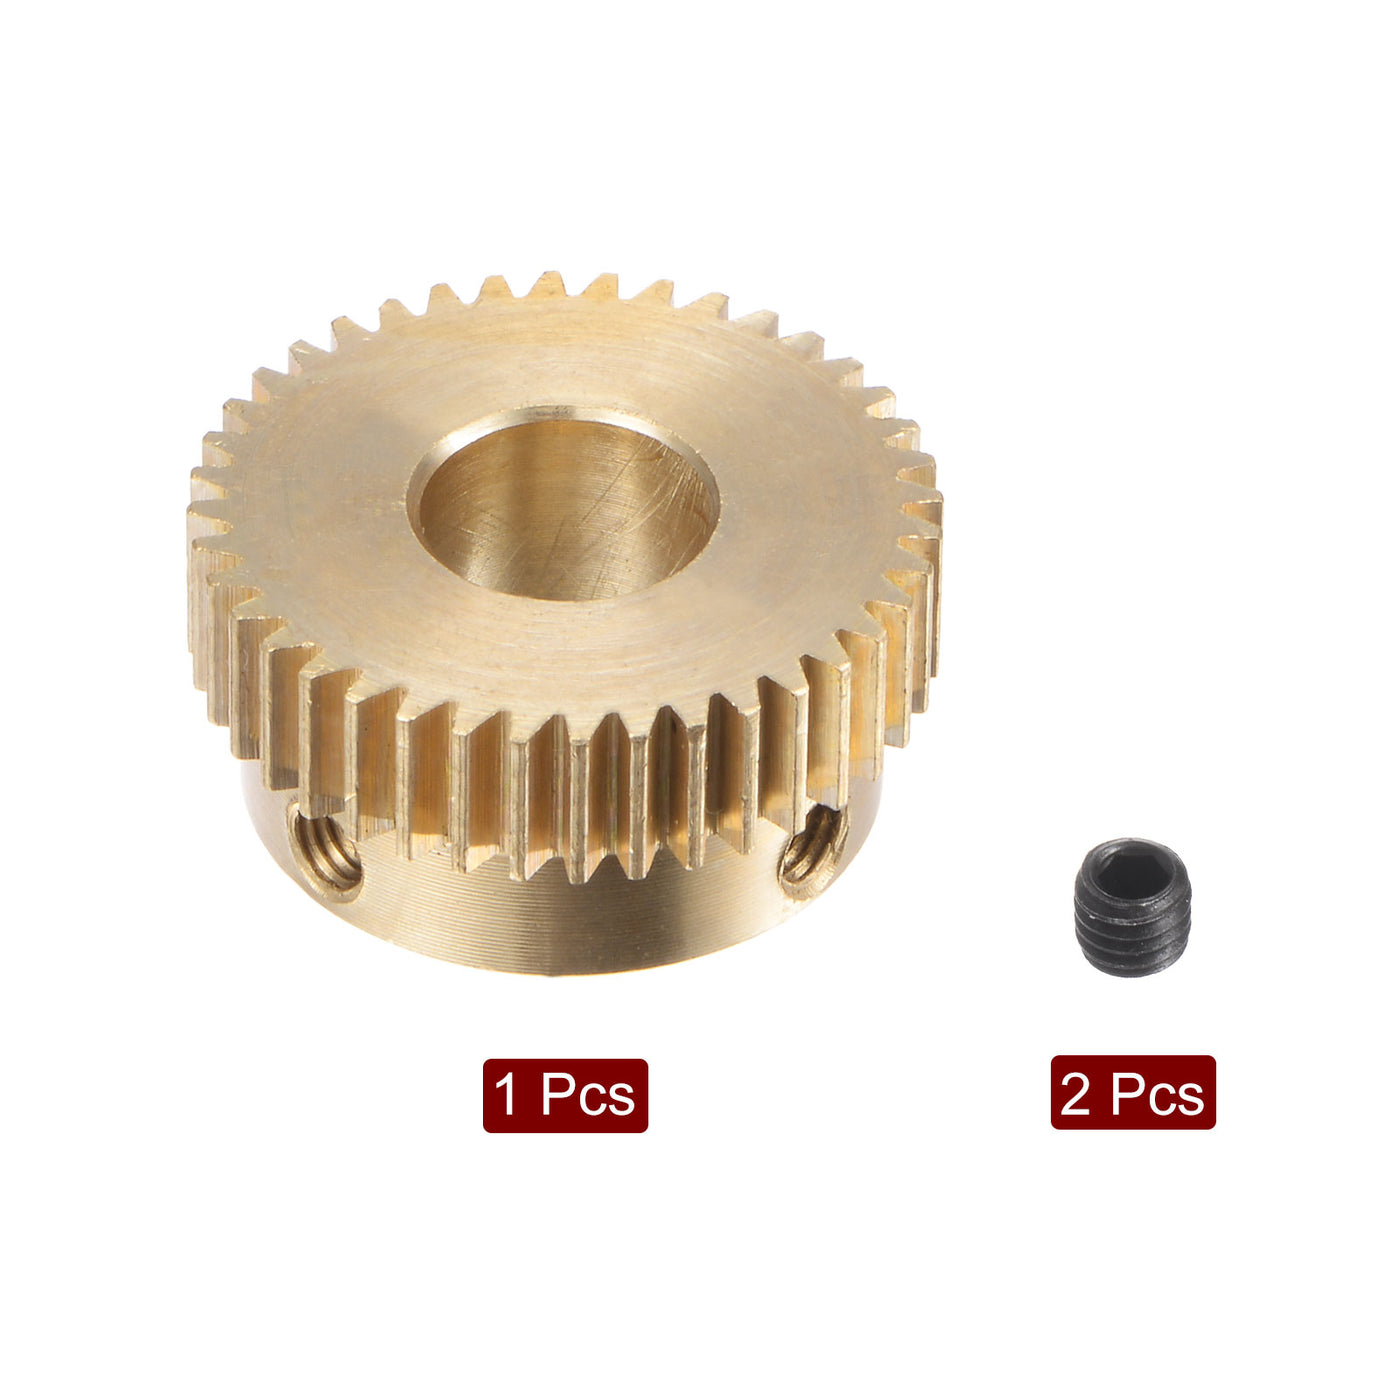 uxcell Uxcell 0.5 Mod 40T 8mm Bore 21mm Outer Dia Brass Motor Rack Pinion Gear with Screws